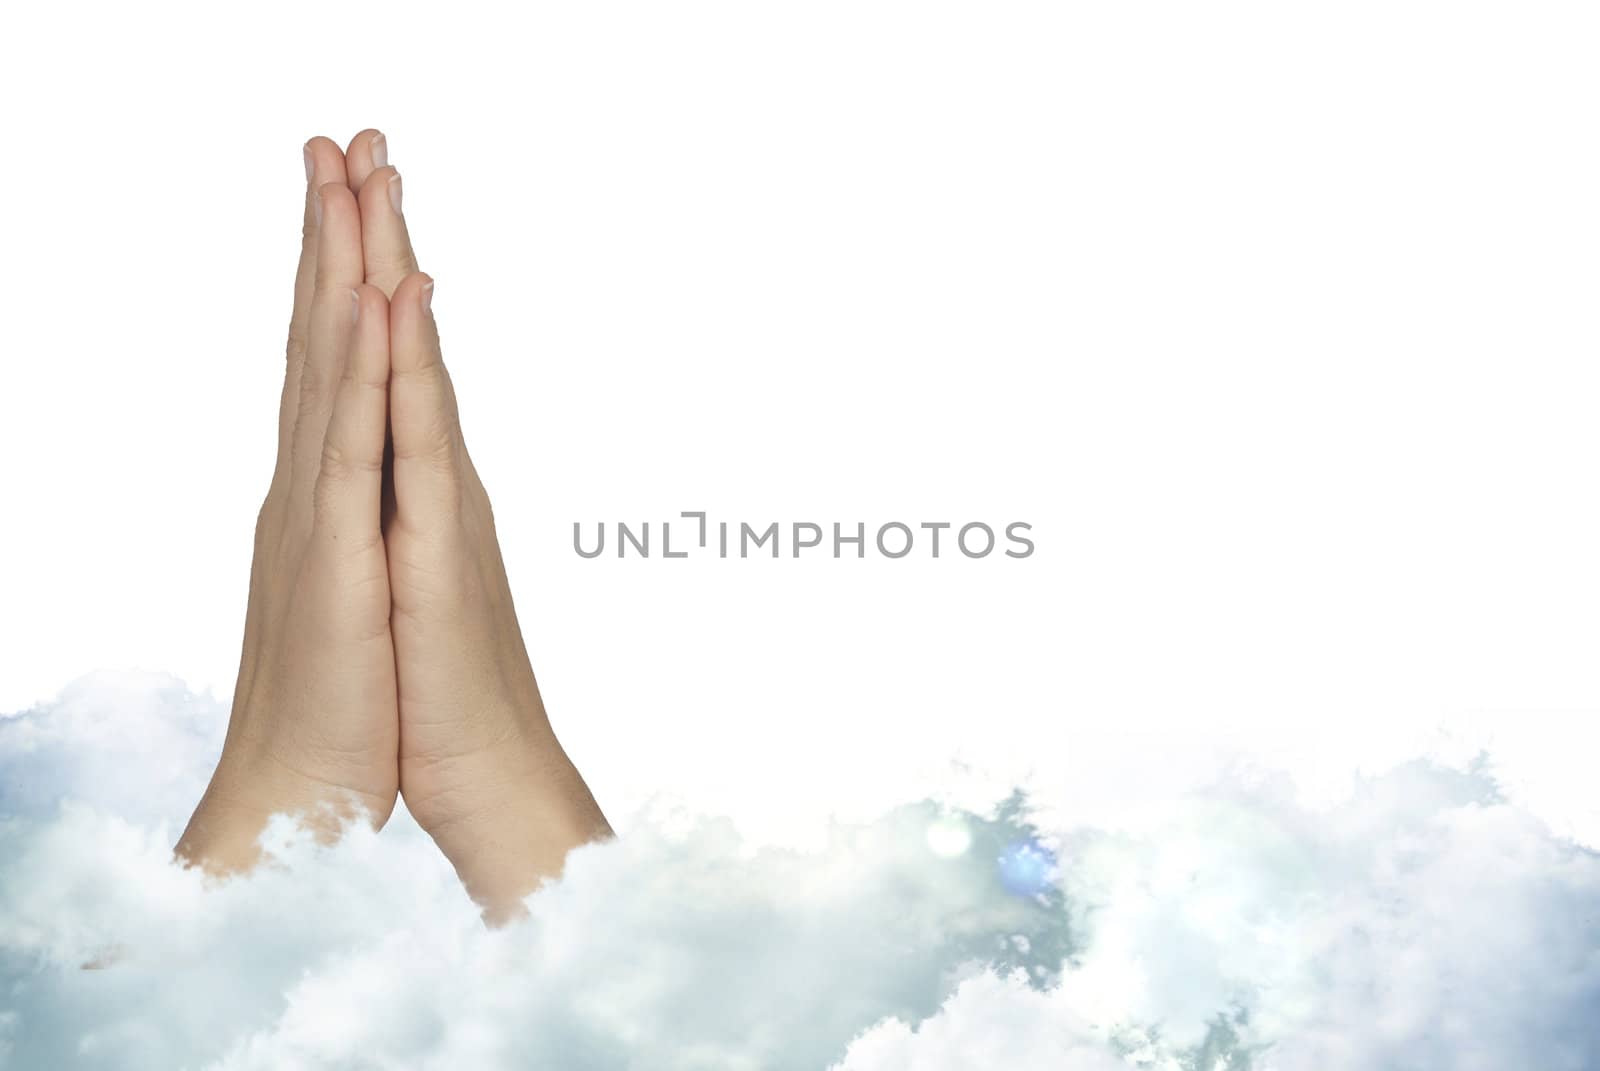 Praying woman hands with mystic holly clouds 